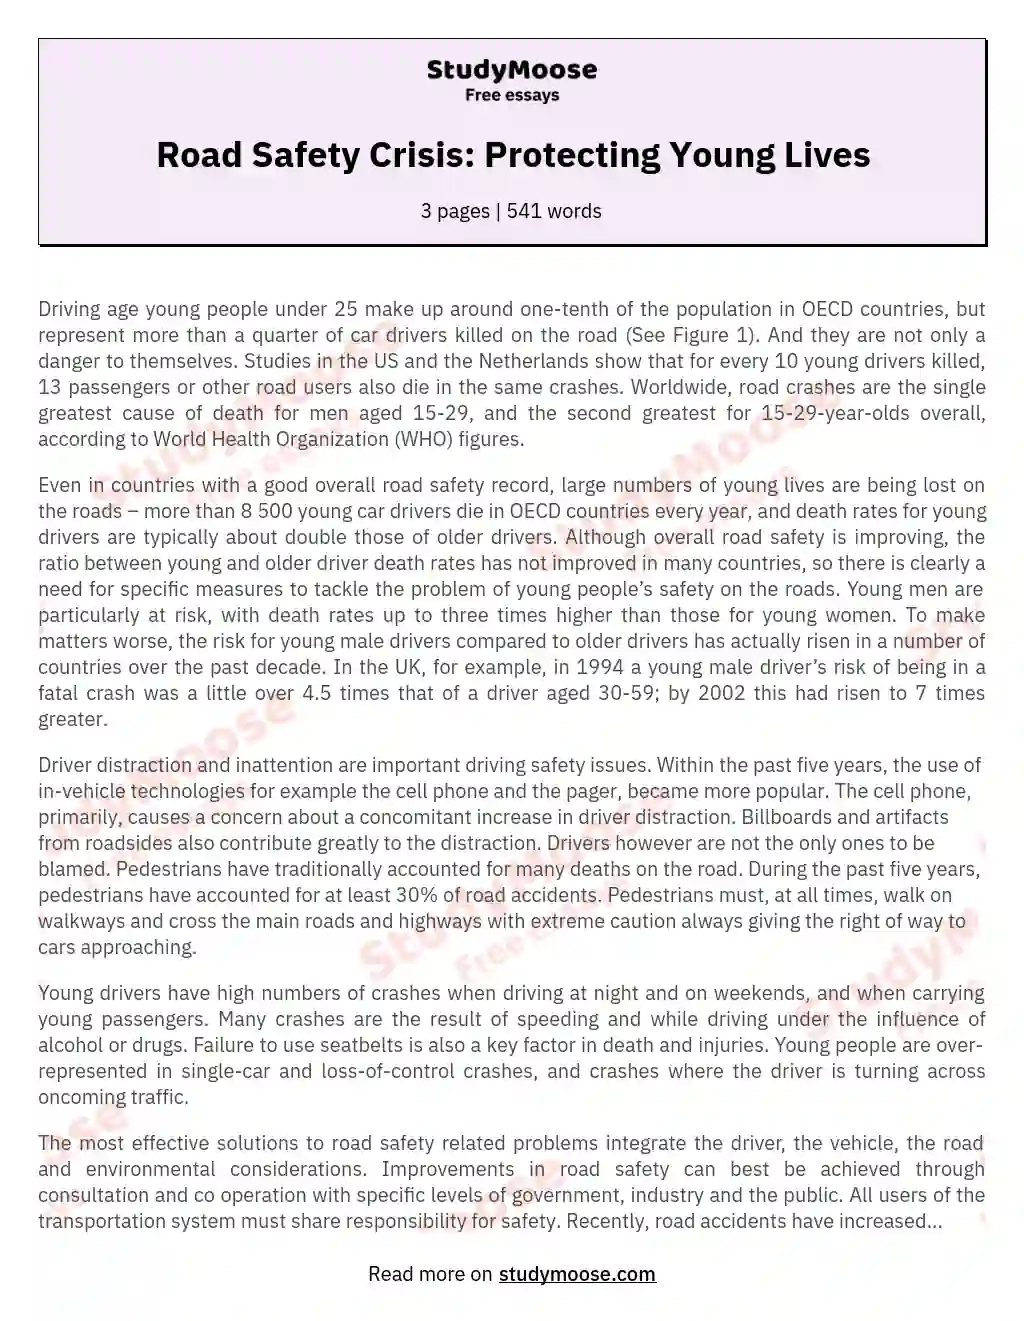 Road Safety Crisis: Protecting Young Lives essay